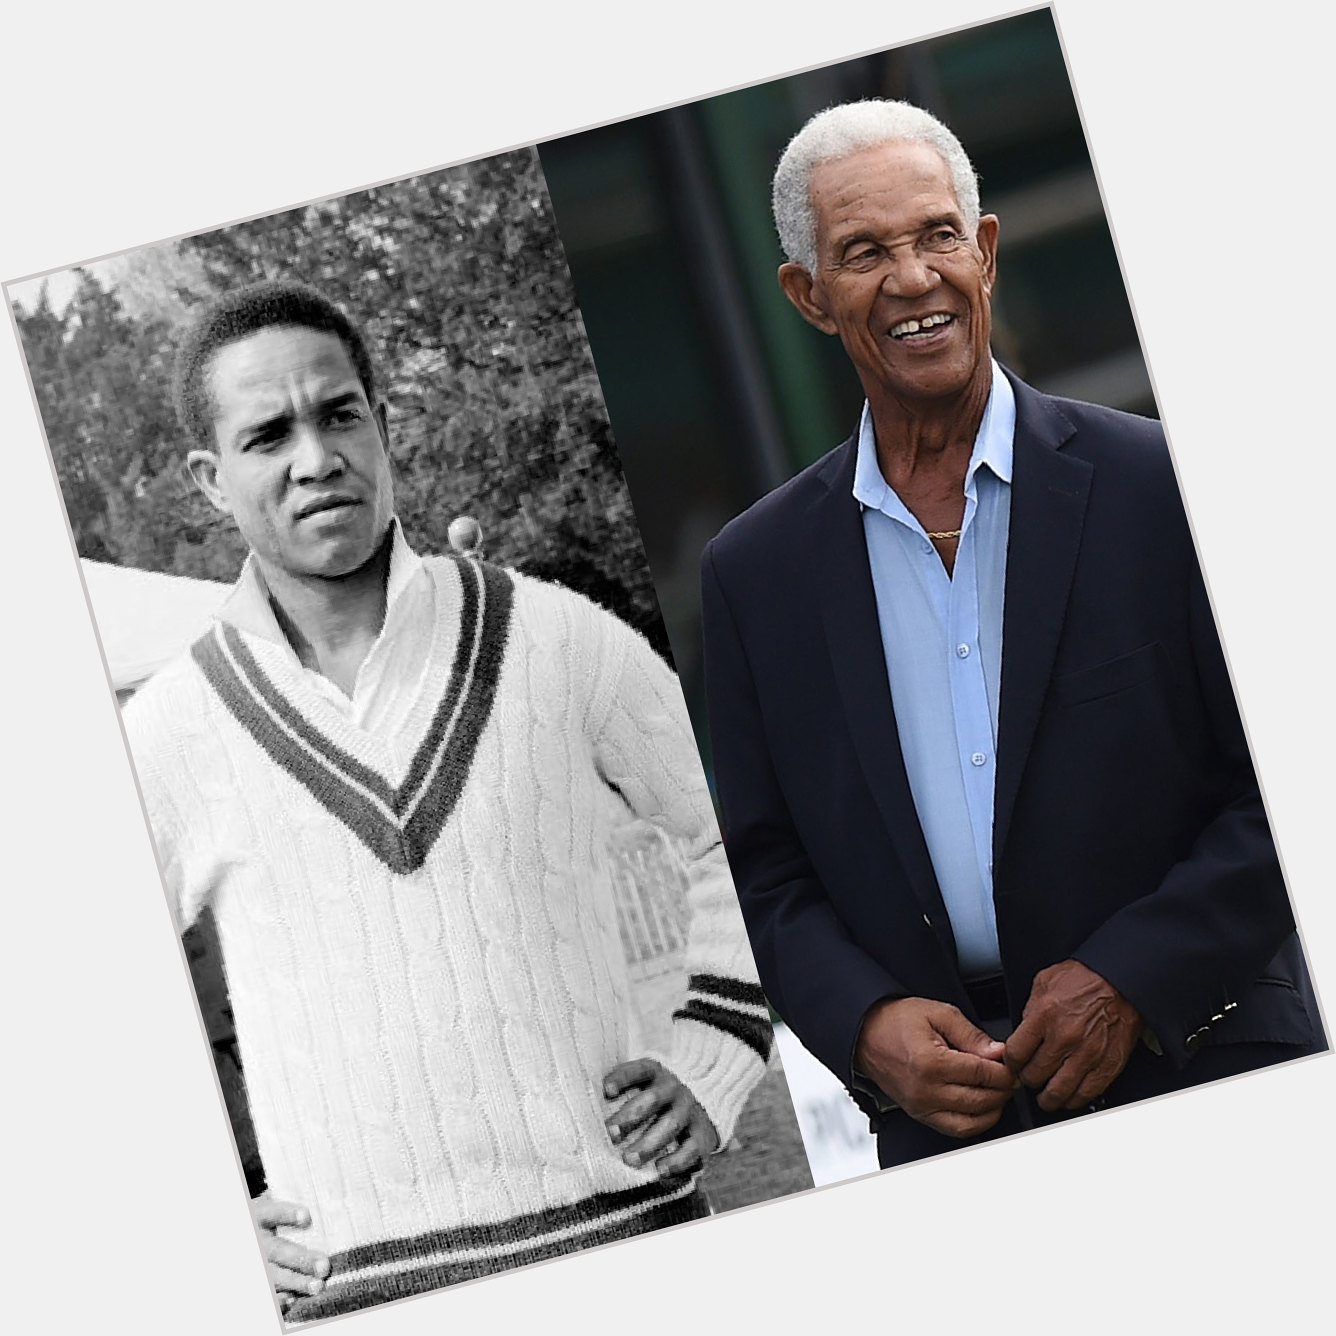 Happy birthday to a legend of cricket - Sir Garfield Sobers turns 84 today! 